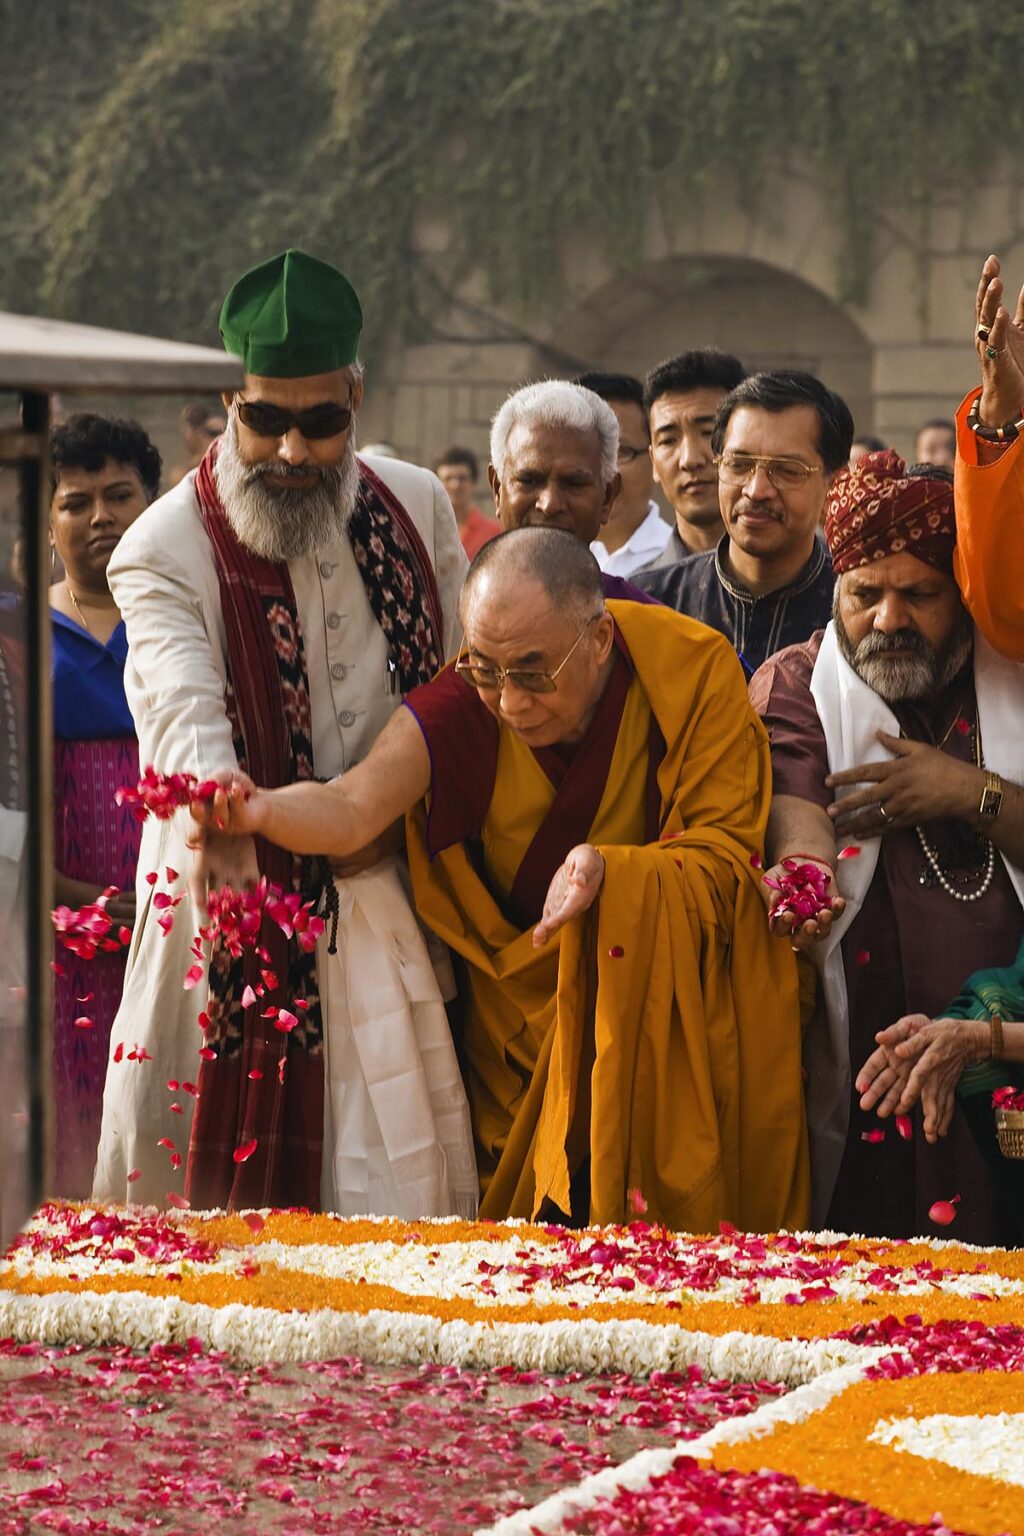 Religious leaders participate in a PRAYER FOR WORLD PEACE sponsored by the 14th Dalai Lama of Tibet at the RAJ GHAT (Ghandi's eternal flame) in April of 2008 -  NEW DELHI, INDIA